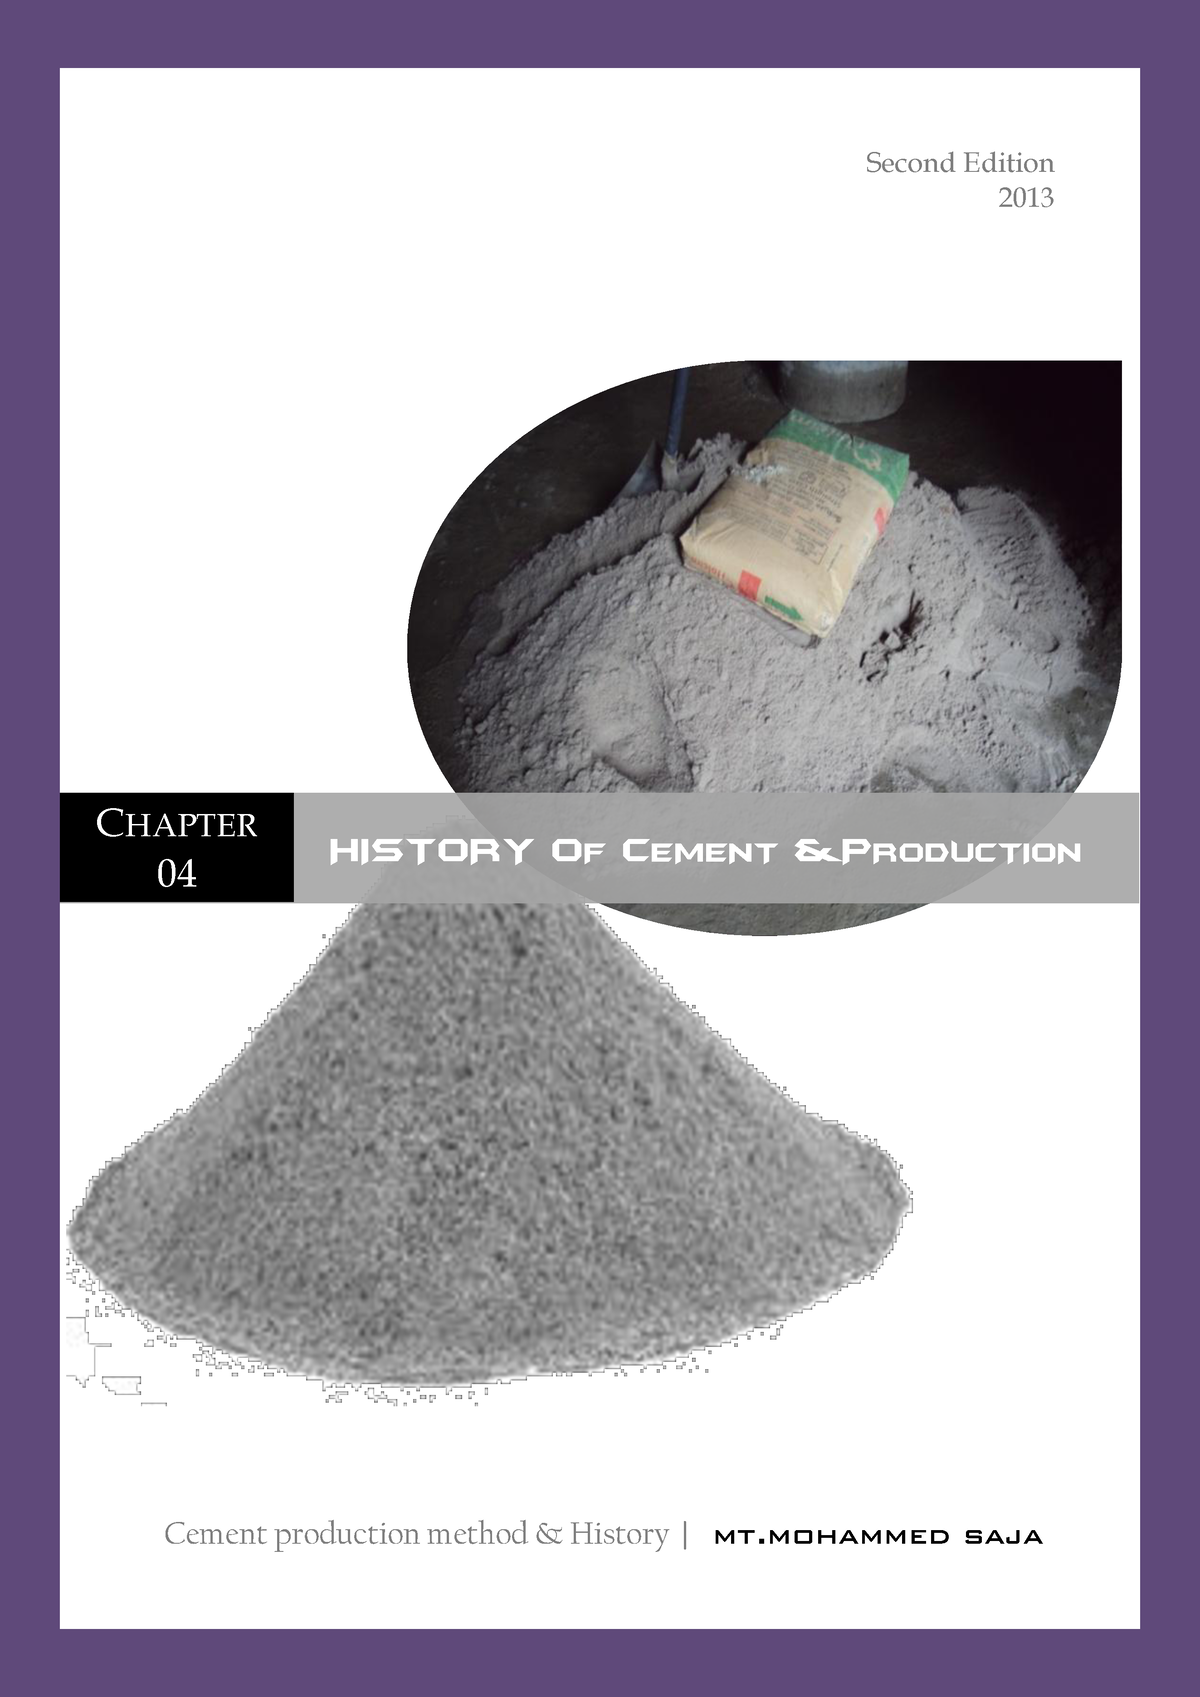 Cement History and Production Contents - Second Edition 2013 Cement ...